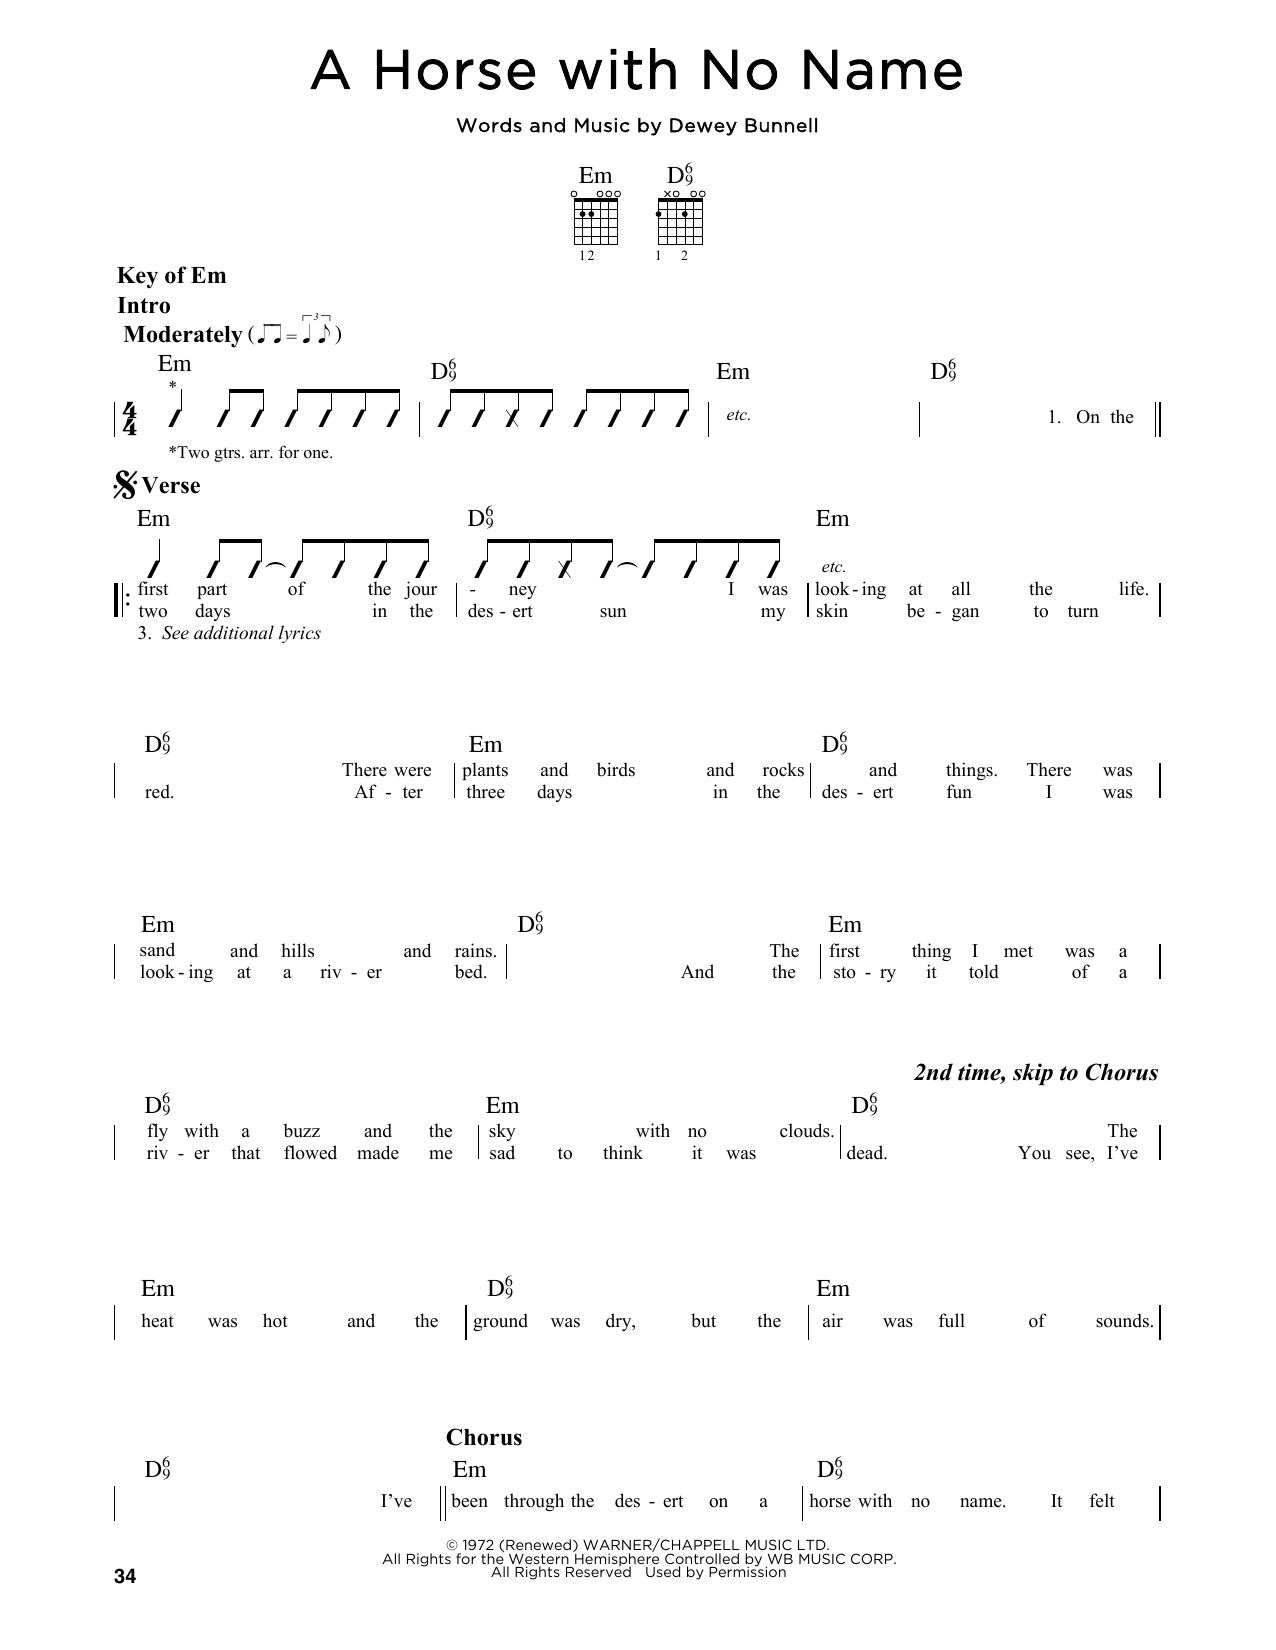 Download America A Horse With No Name Sheet Music